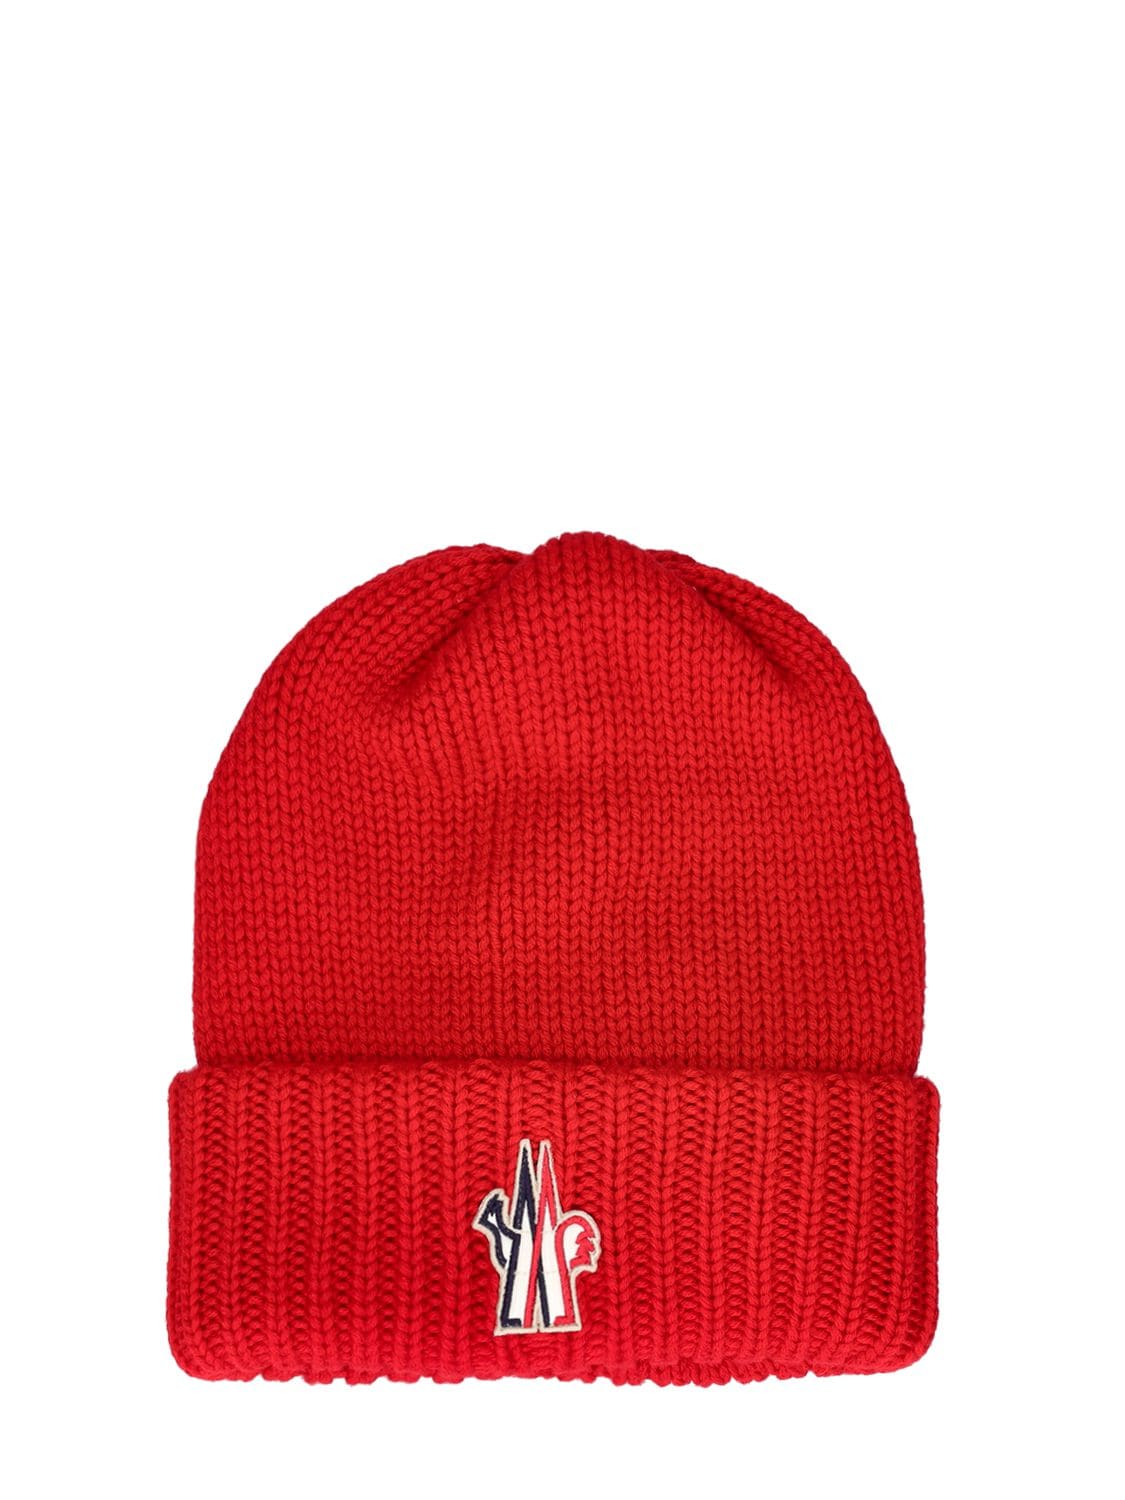 MONCLER WOOL TRICOT BEANIE HAT